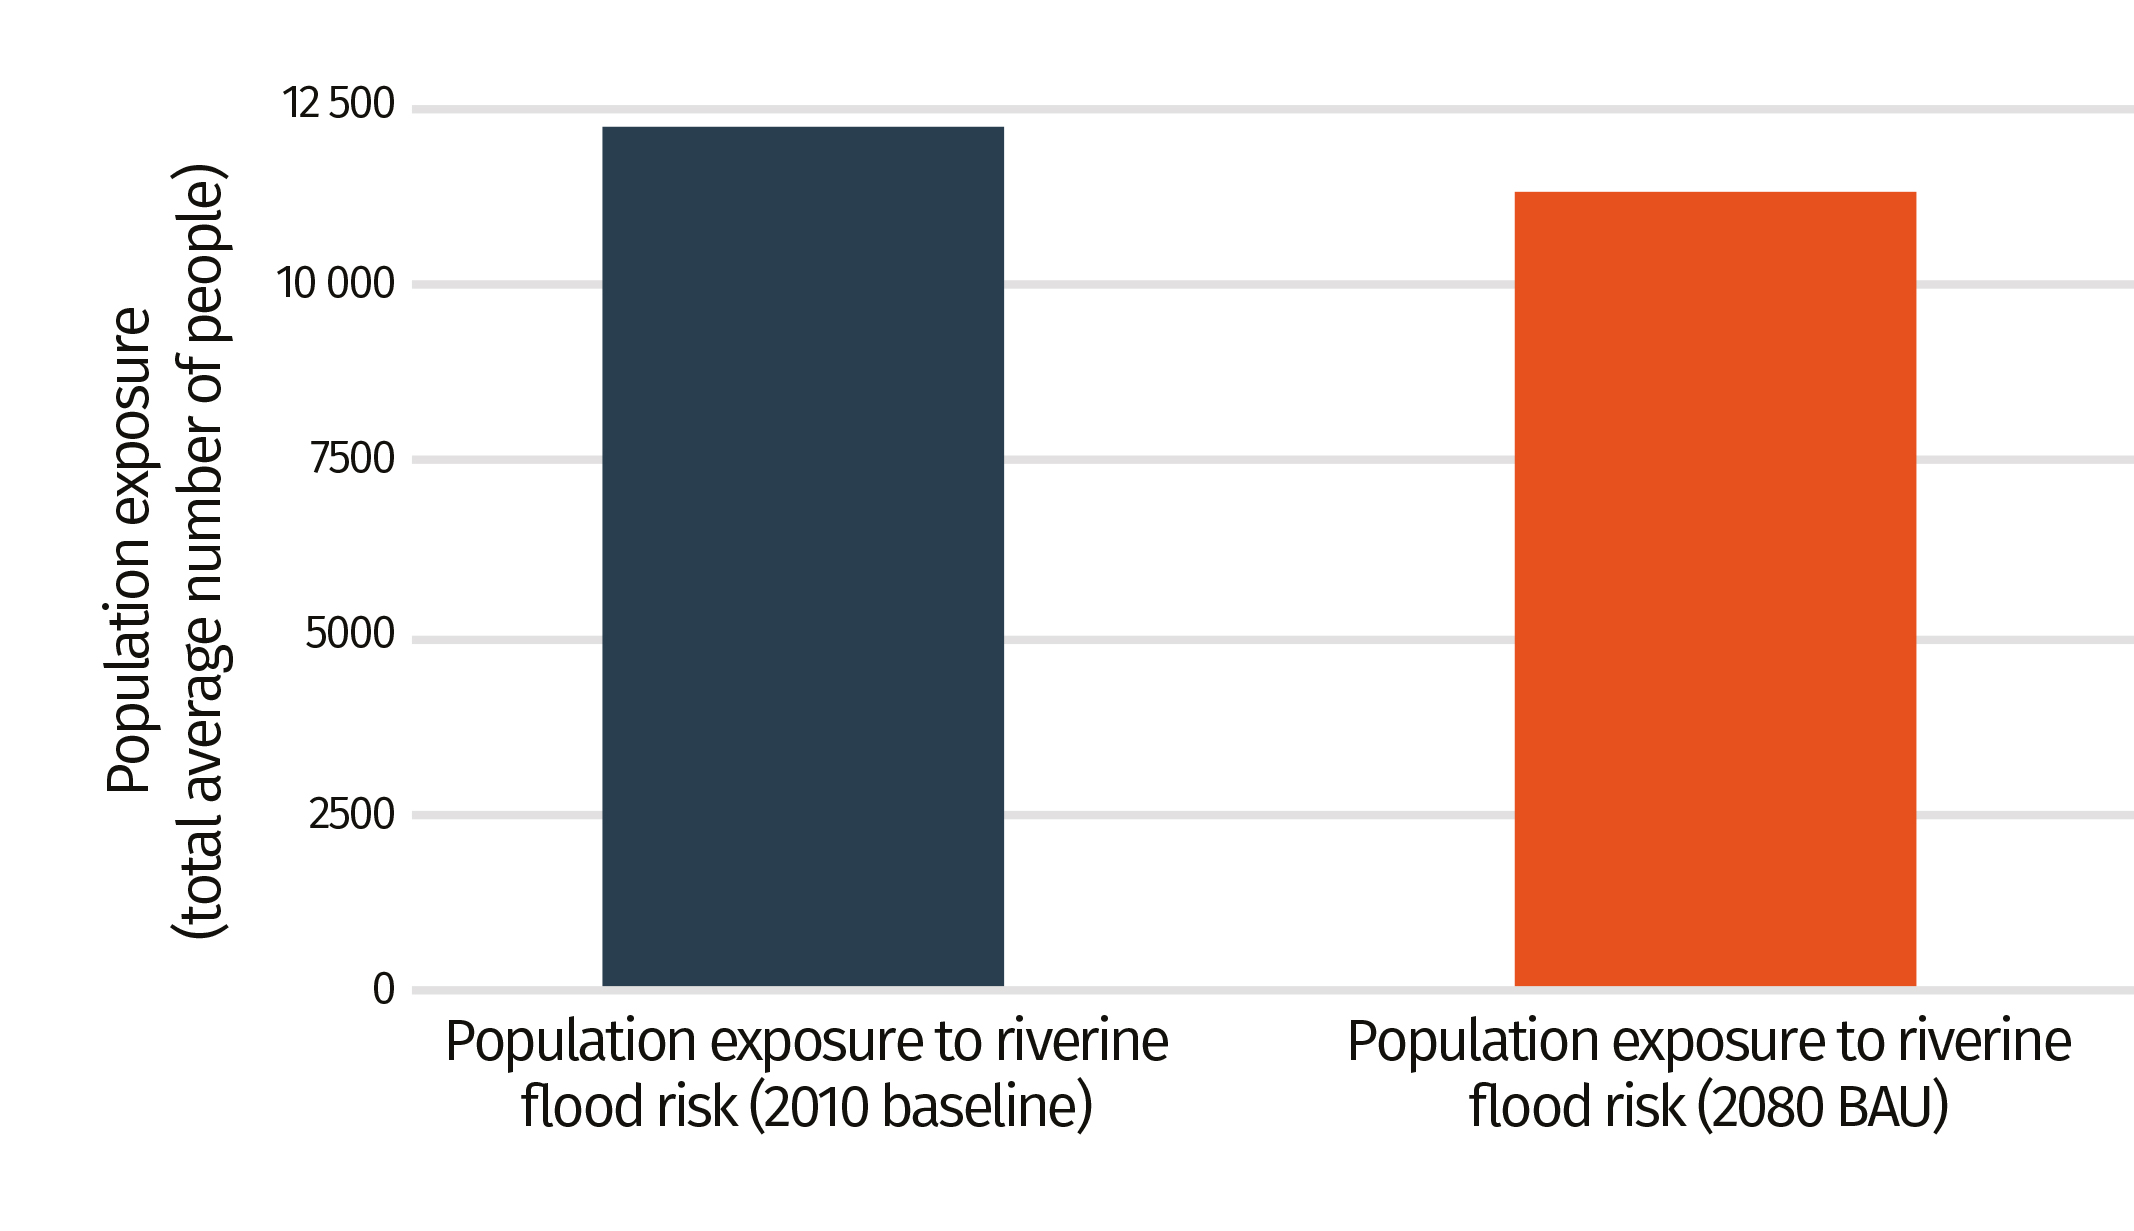 Change in population exposure to riverine flooding in Czechia